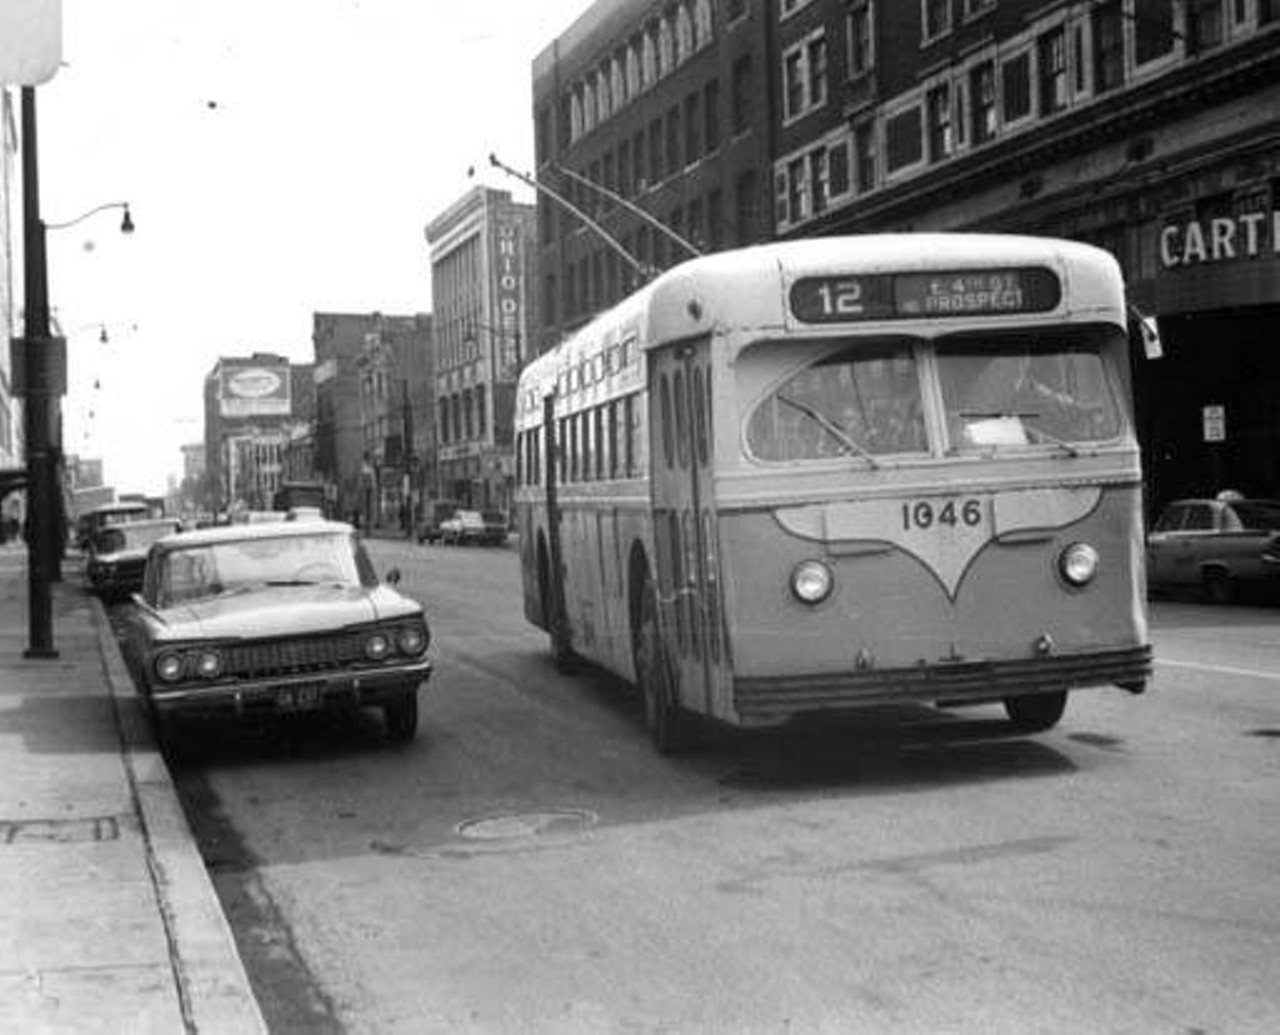 Cleveland Transit Trackless Trolley 1046 on Prospect Avenue in Cleveland, Ohio. Post Industrial 1930-1959